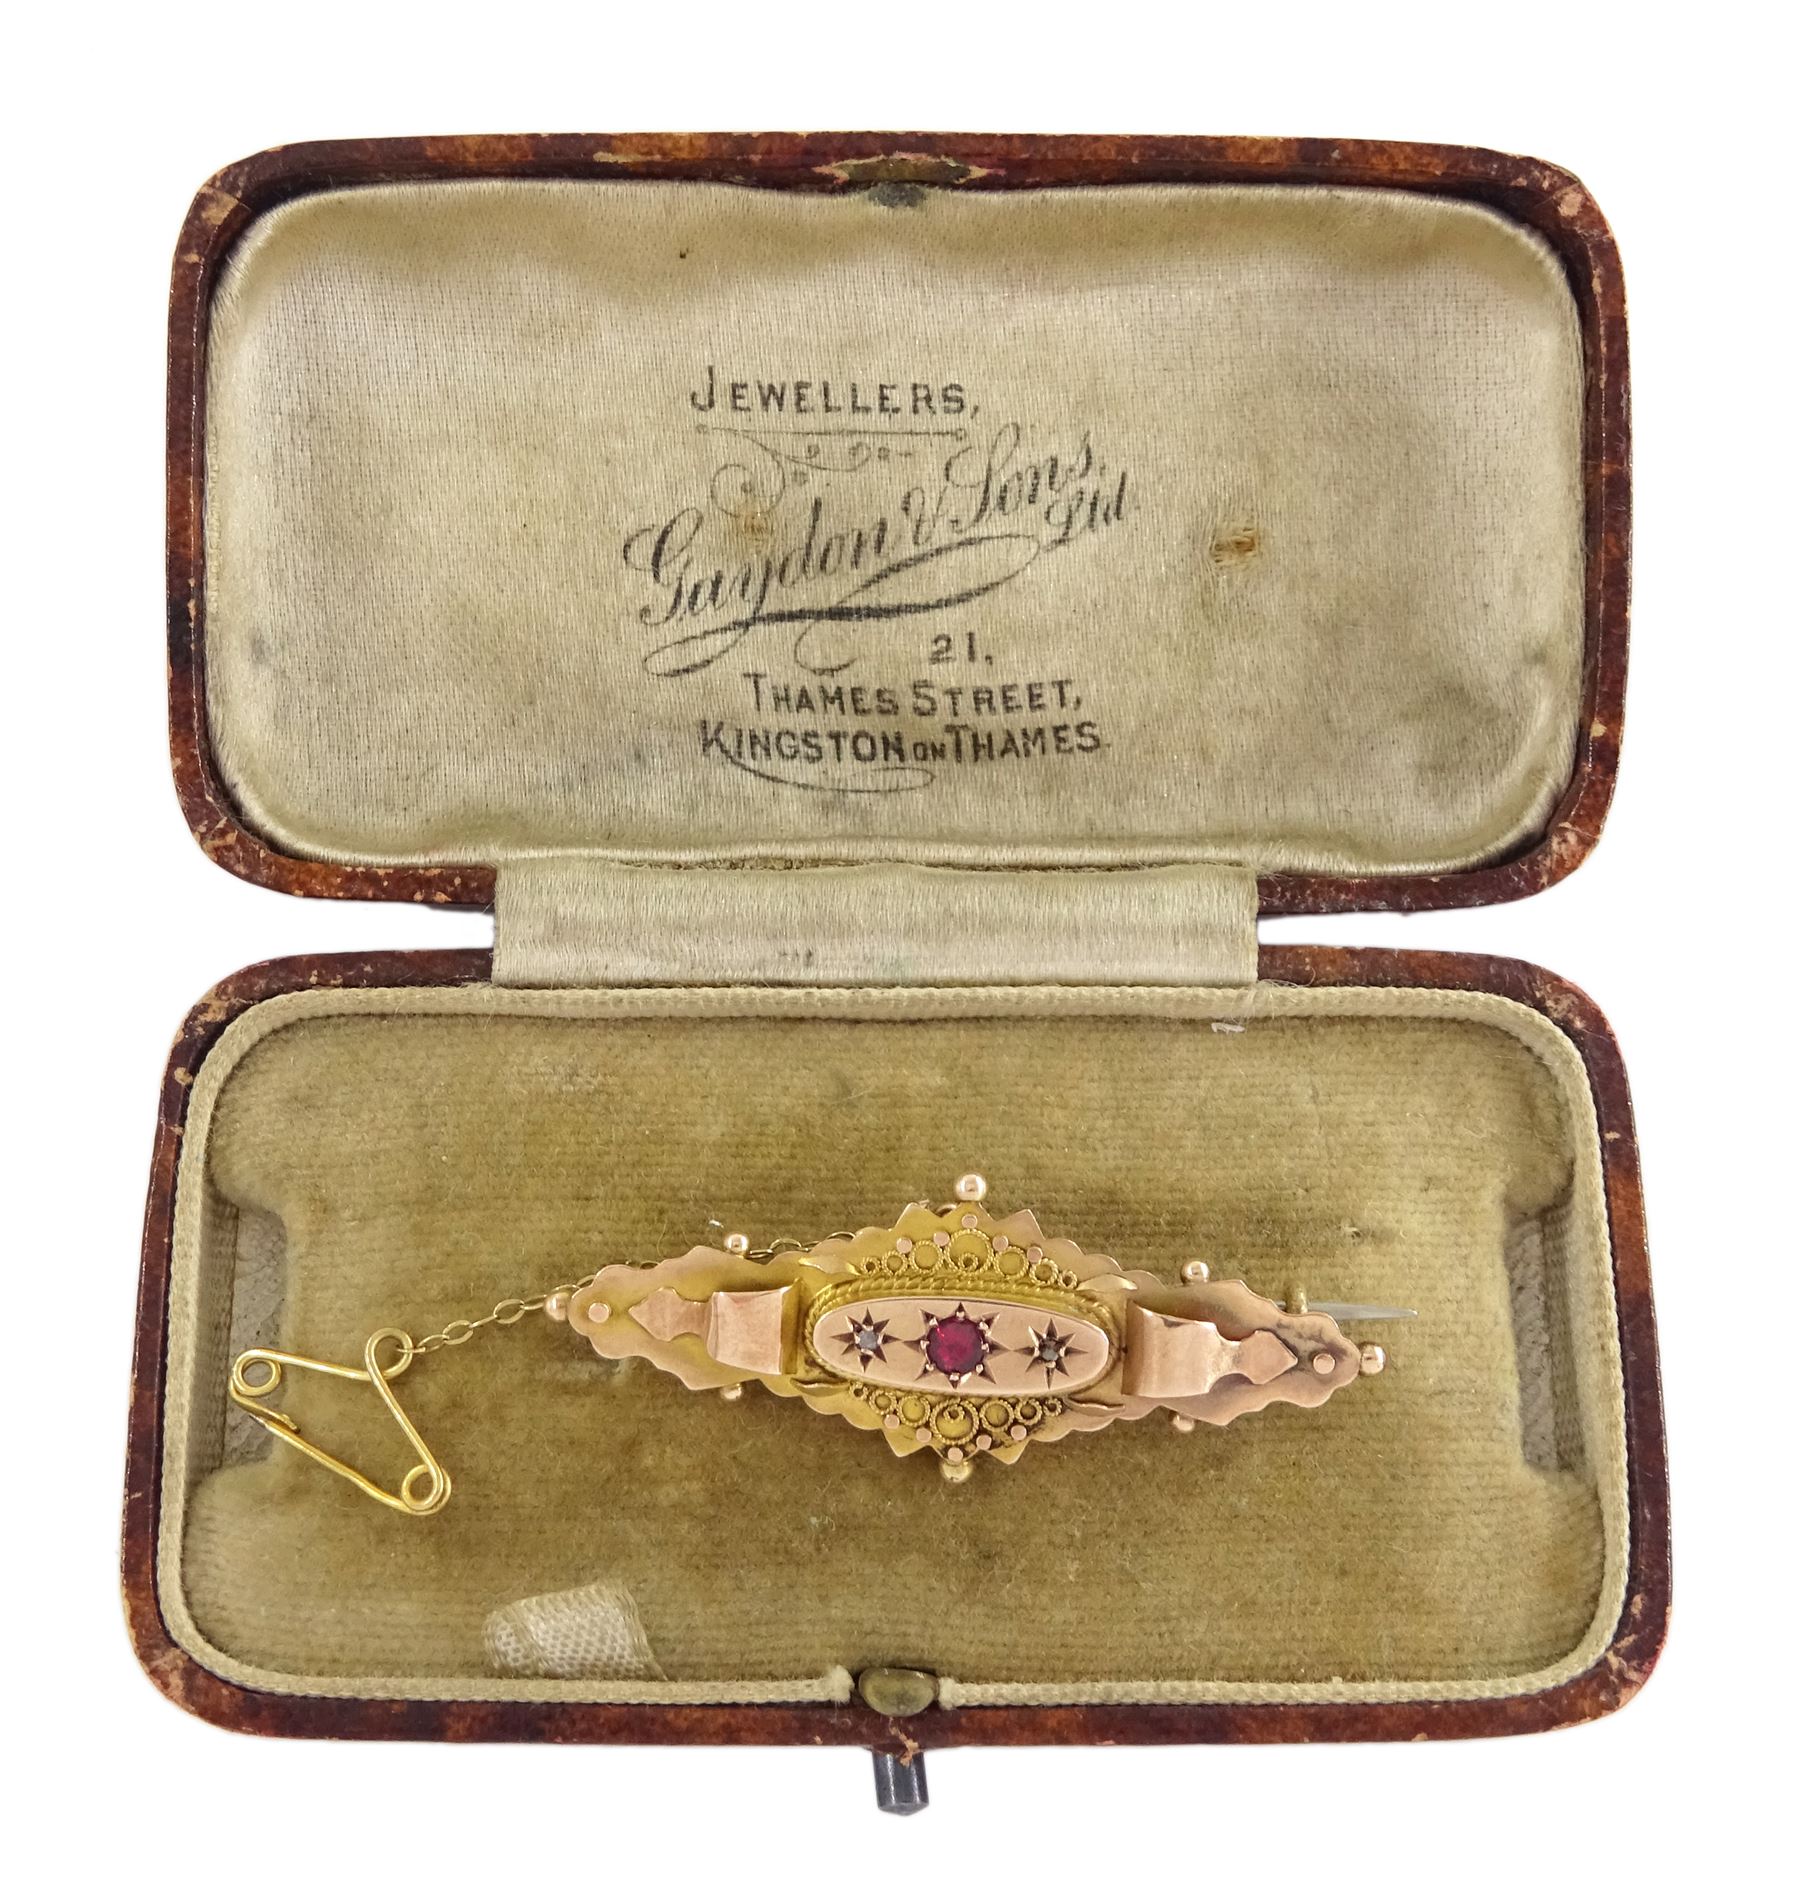 Early 20th century 9ct gold diamond and pink stone set brooch - Image 2 of 3